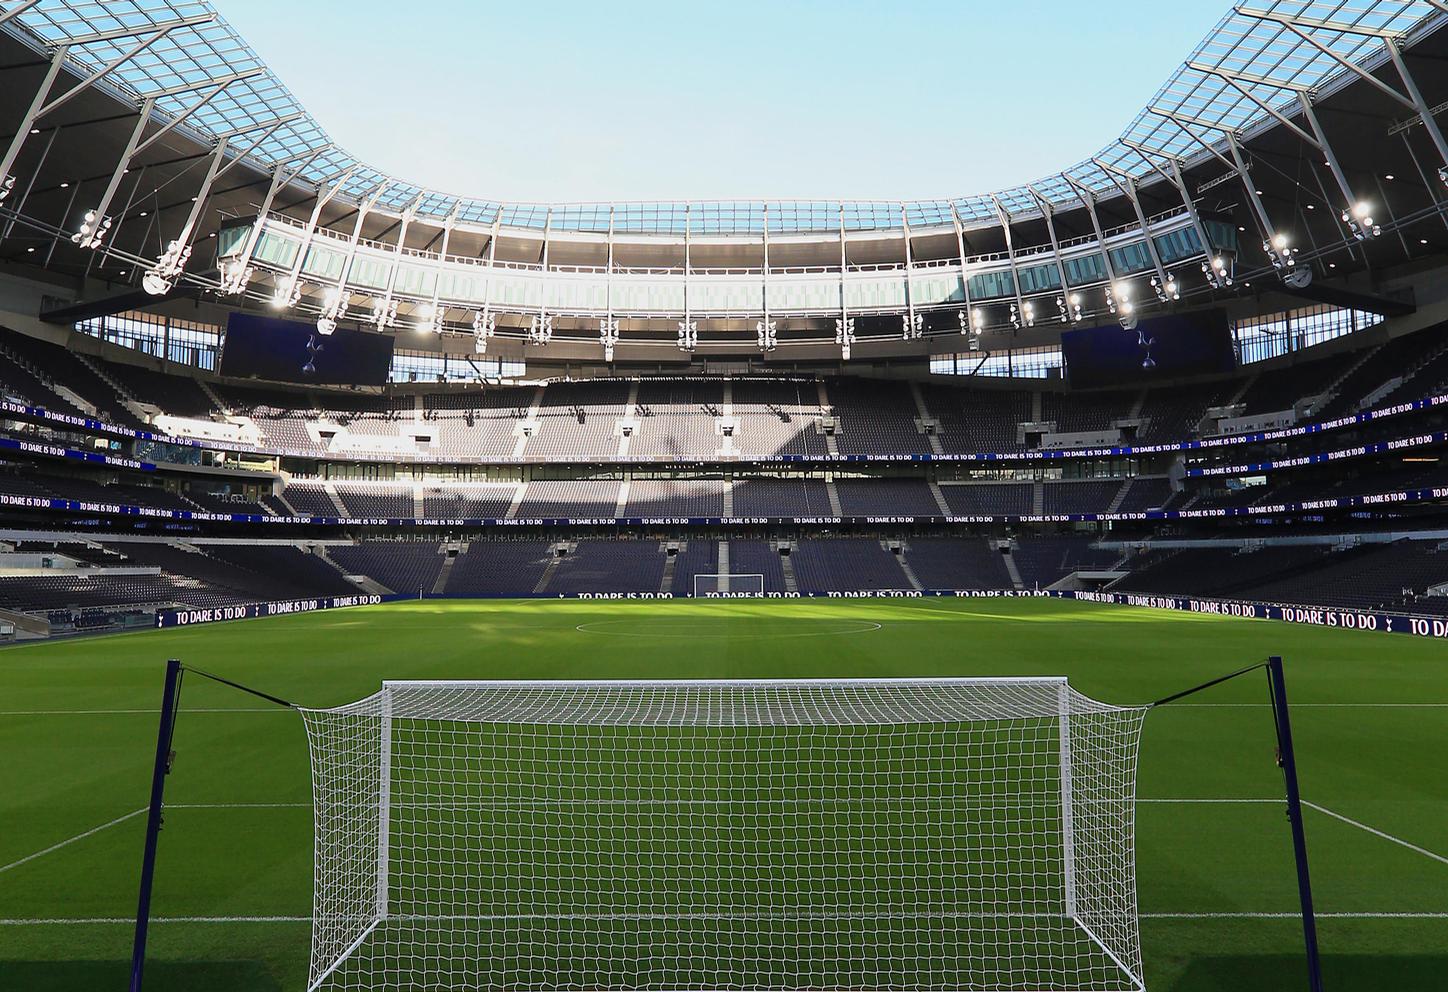 The stadium has the largest football pitch in London. / Courtesy of Tottenham Hotspur